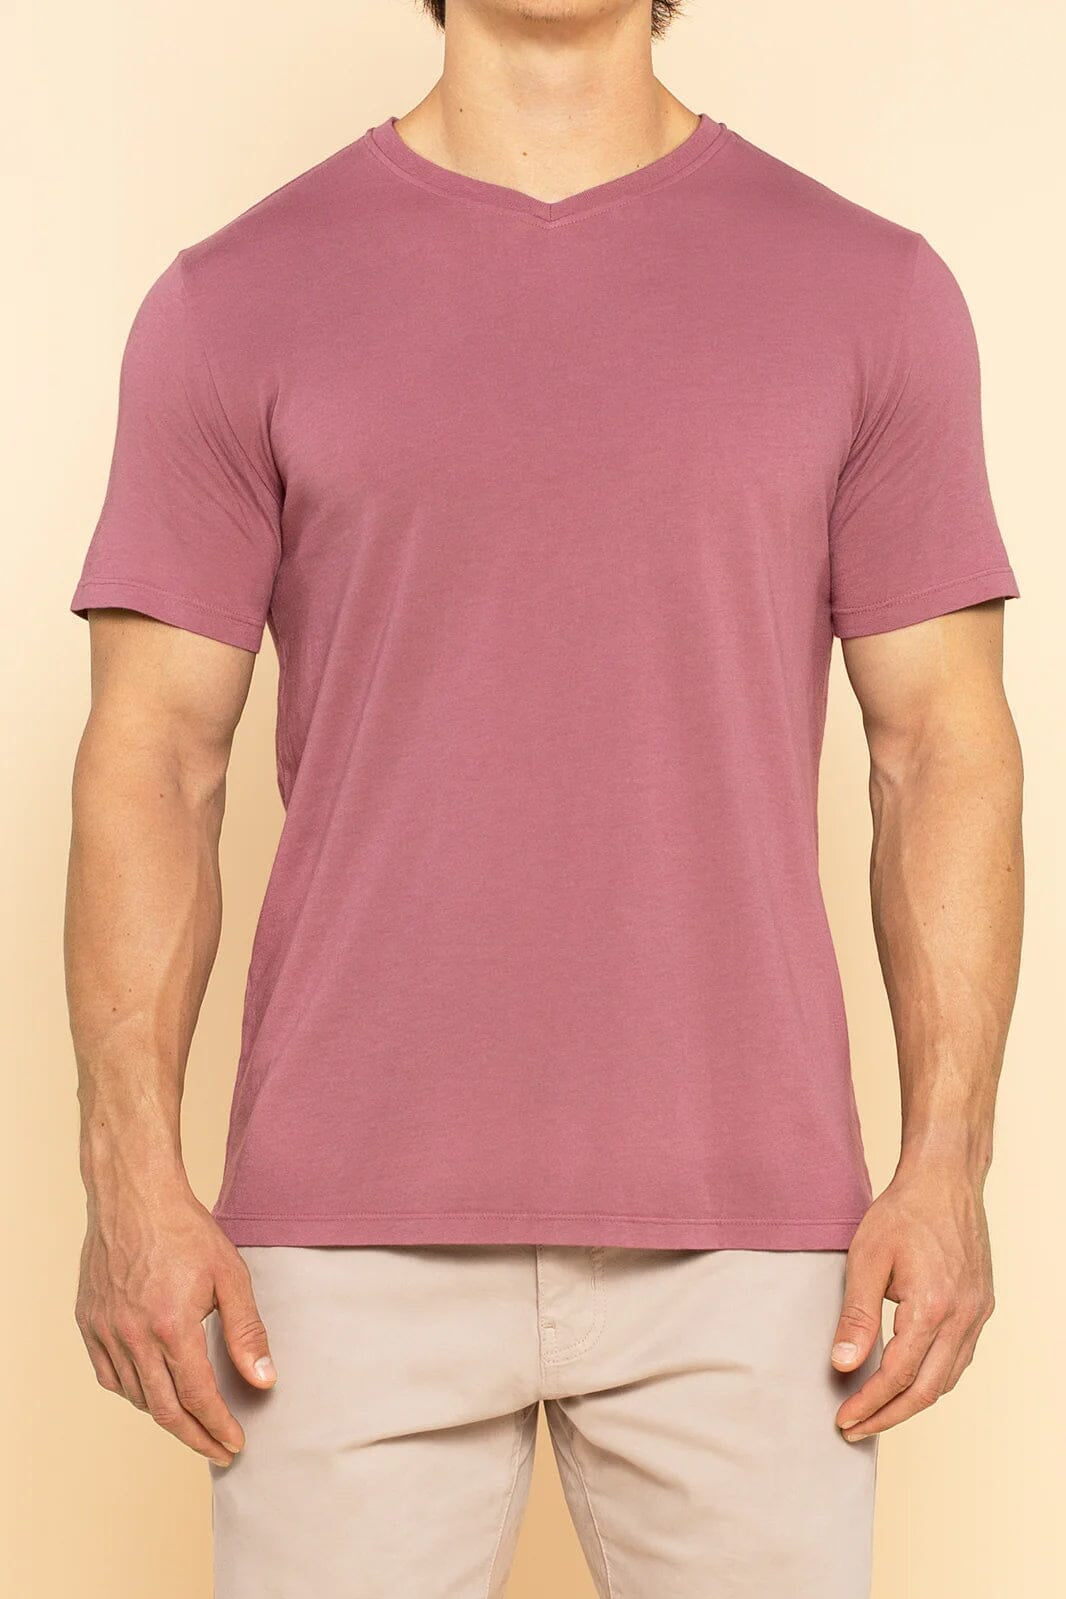 V-NECK TEE - CRUSHED BERRY - XS